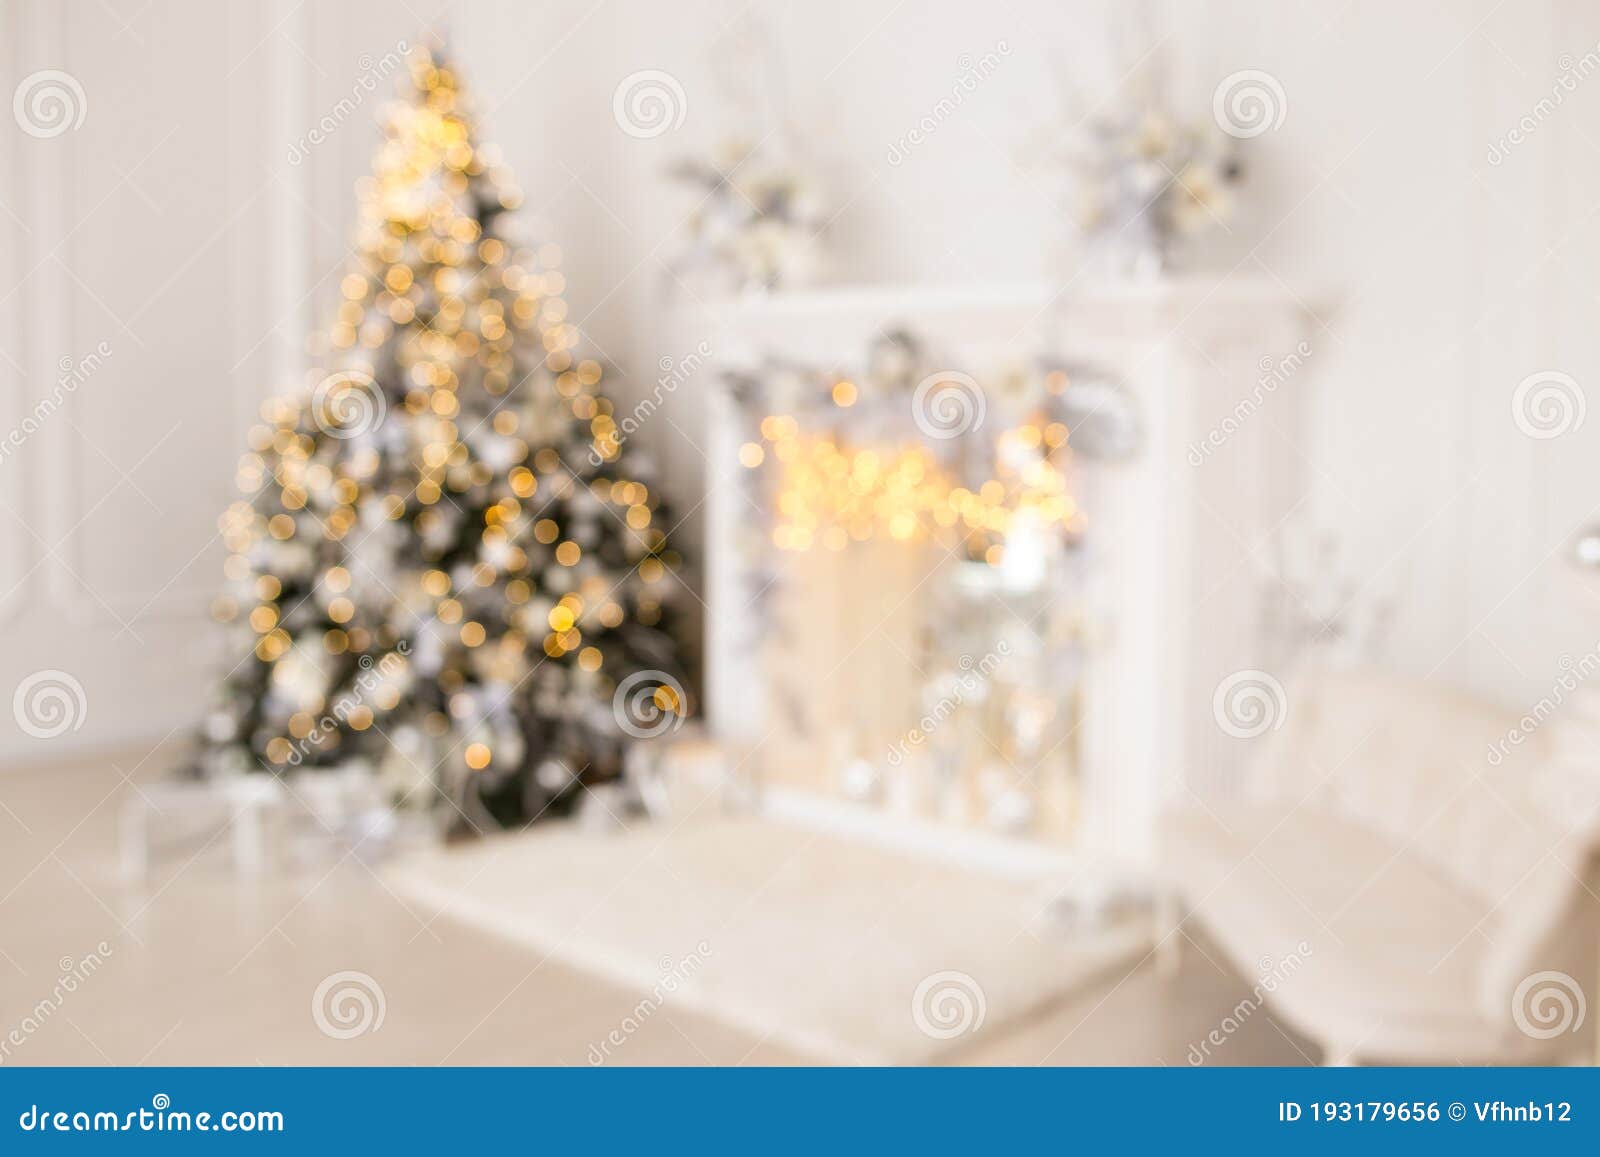 Blurred Background Three Elegant Christmas Trees In A Bright Room New Year S And Christmas Stock Photo Image Of Pink Celebration 193179656